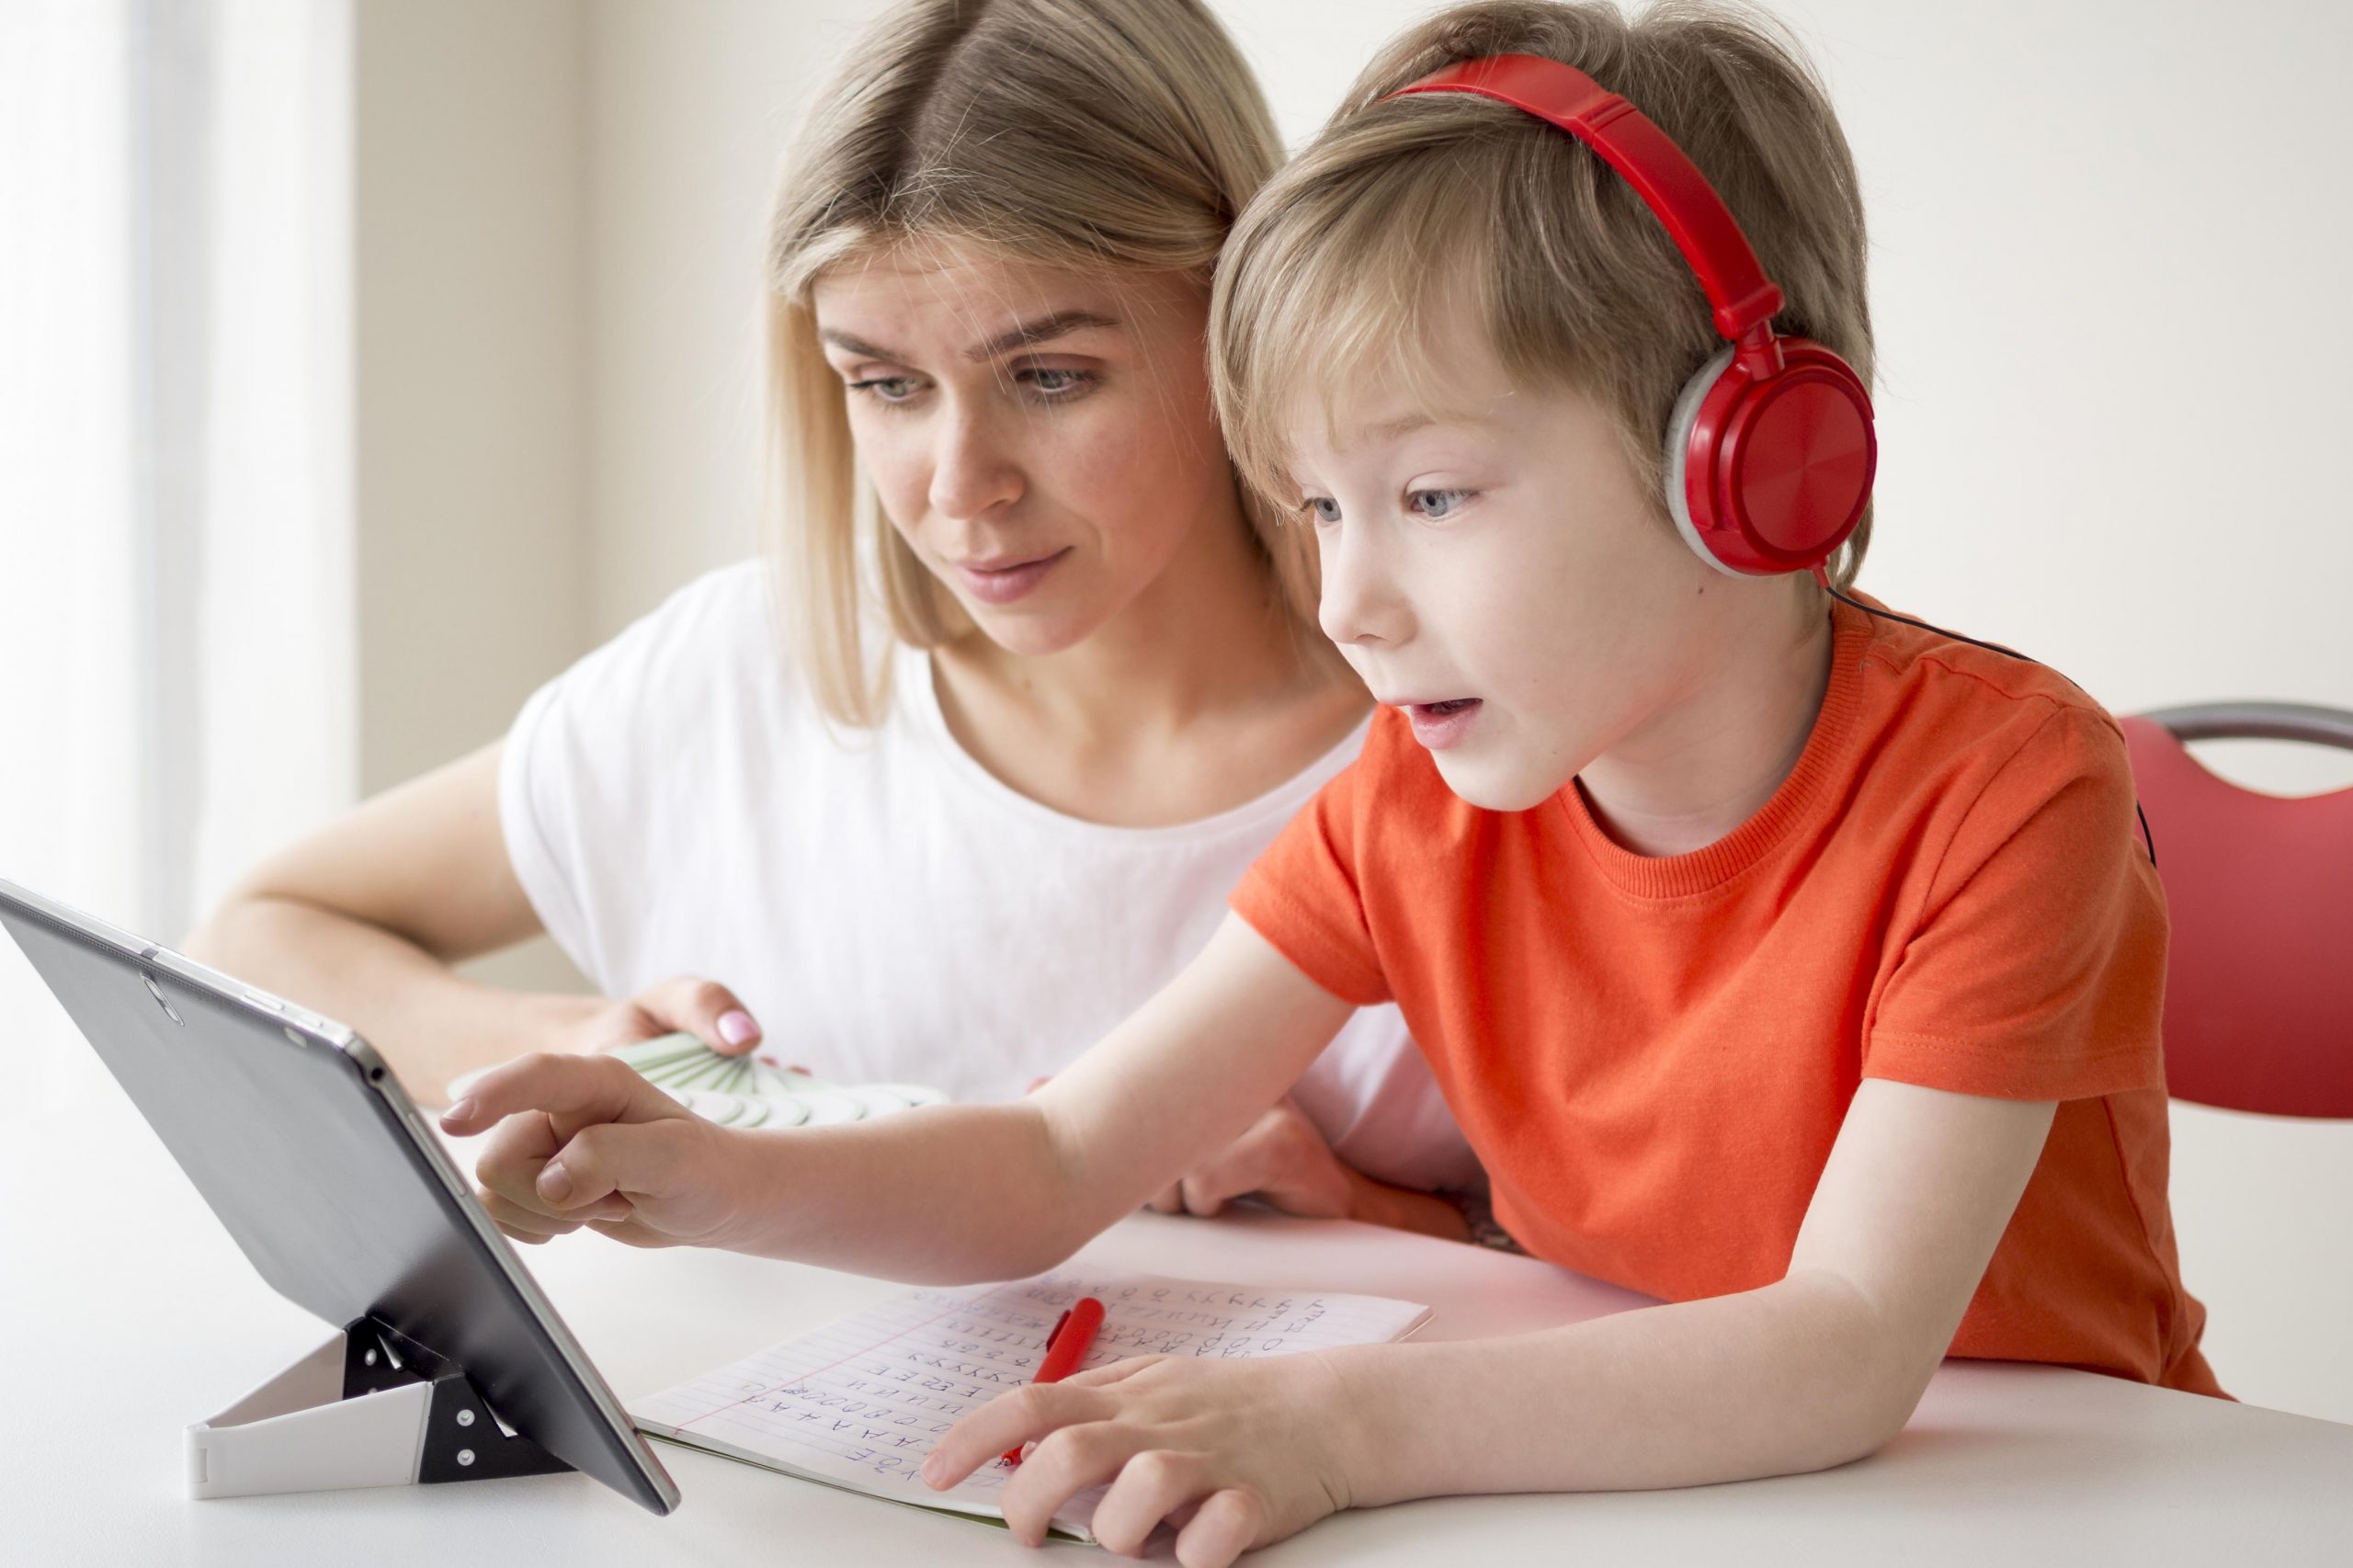 Why Is Coding Important For Kids To Learn?